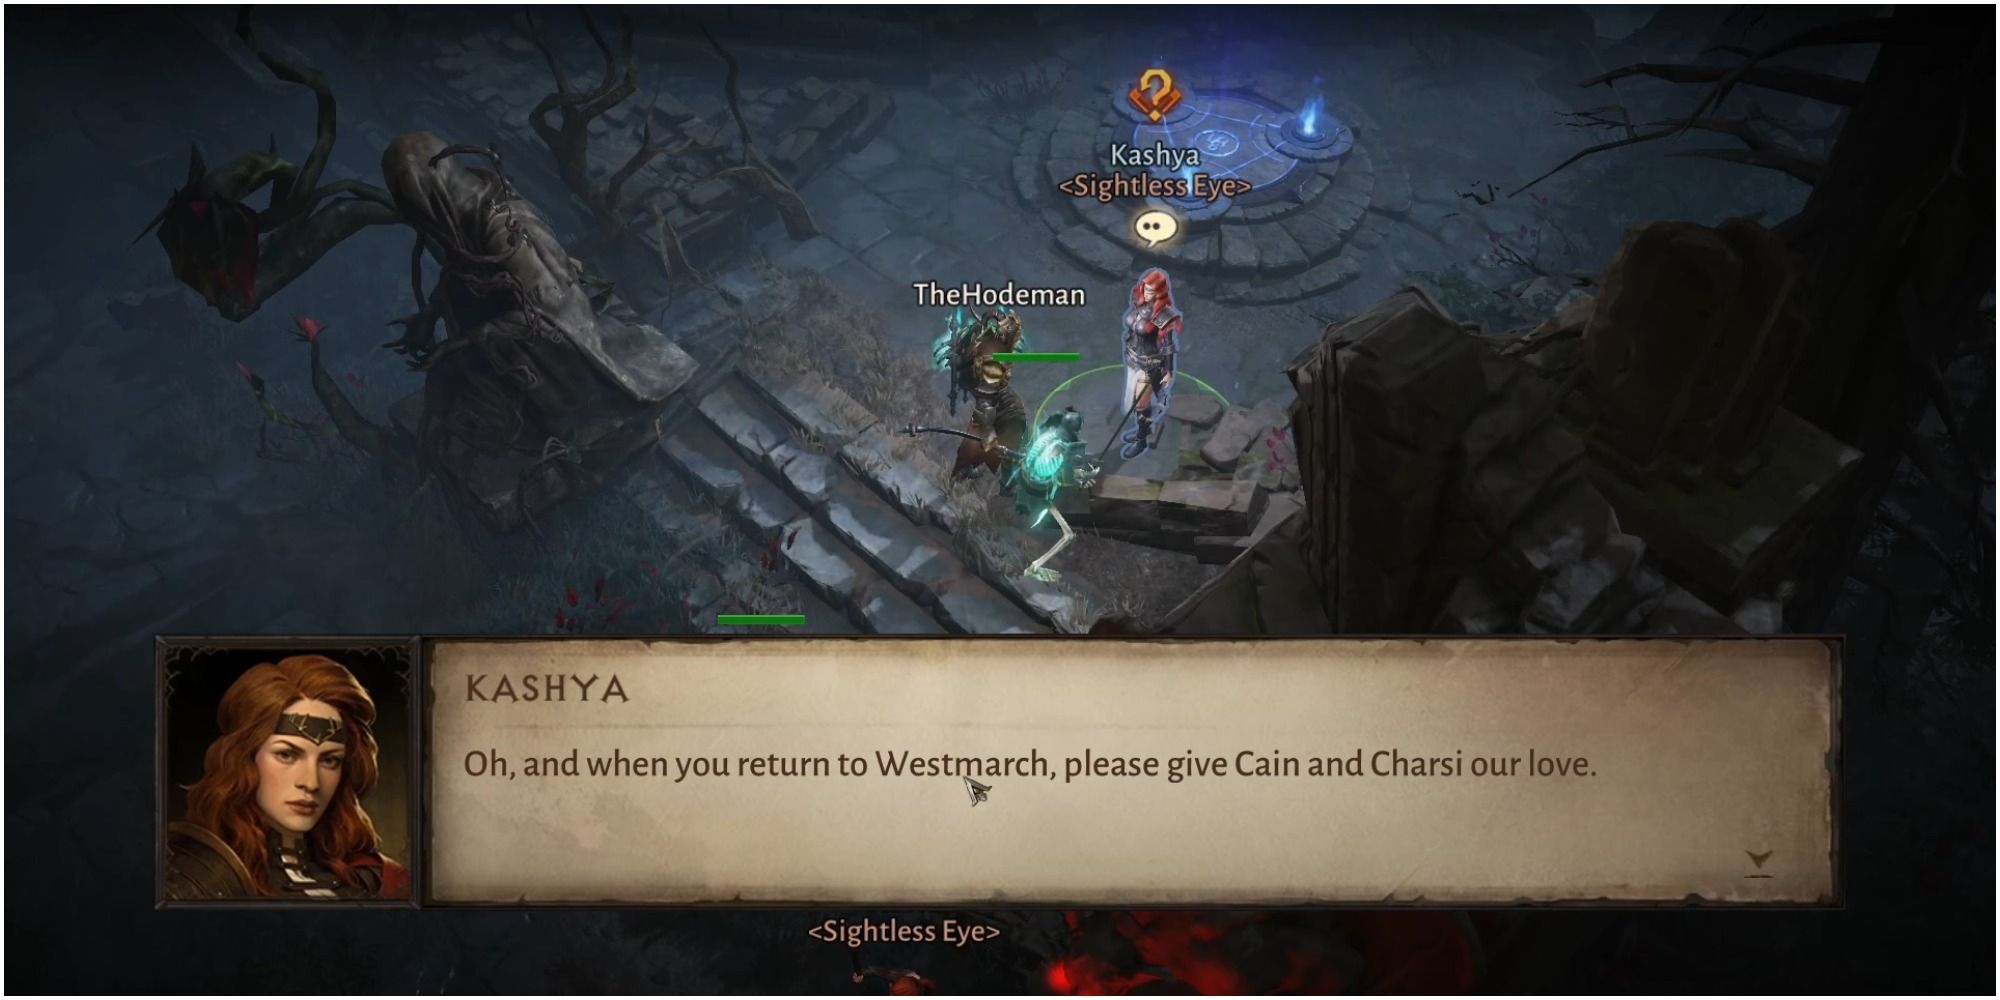 Diablo Immortal Speaking To Kashya About Cain And Charsi